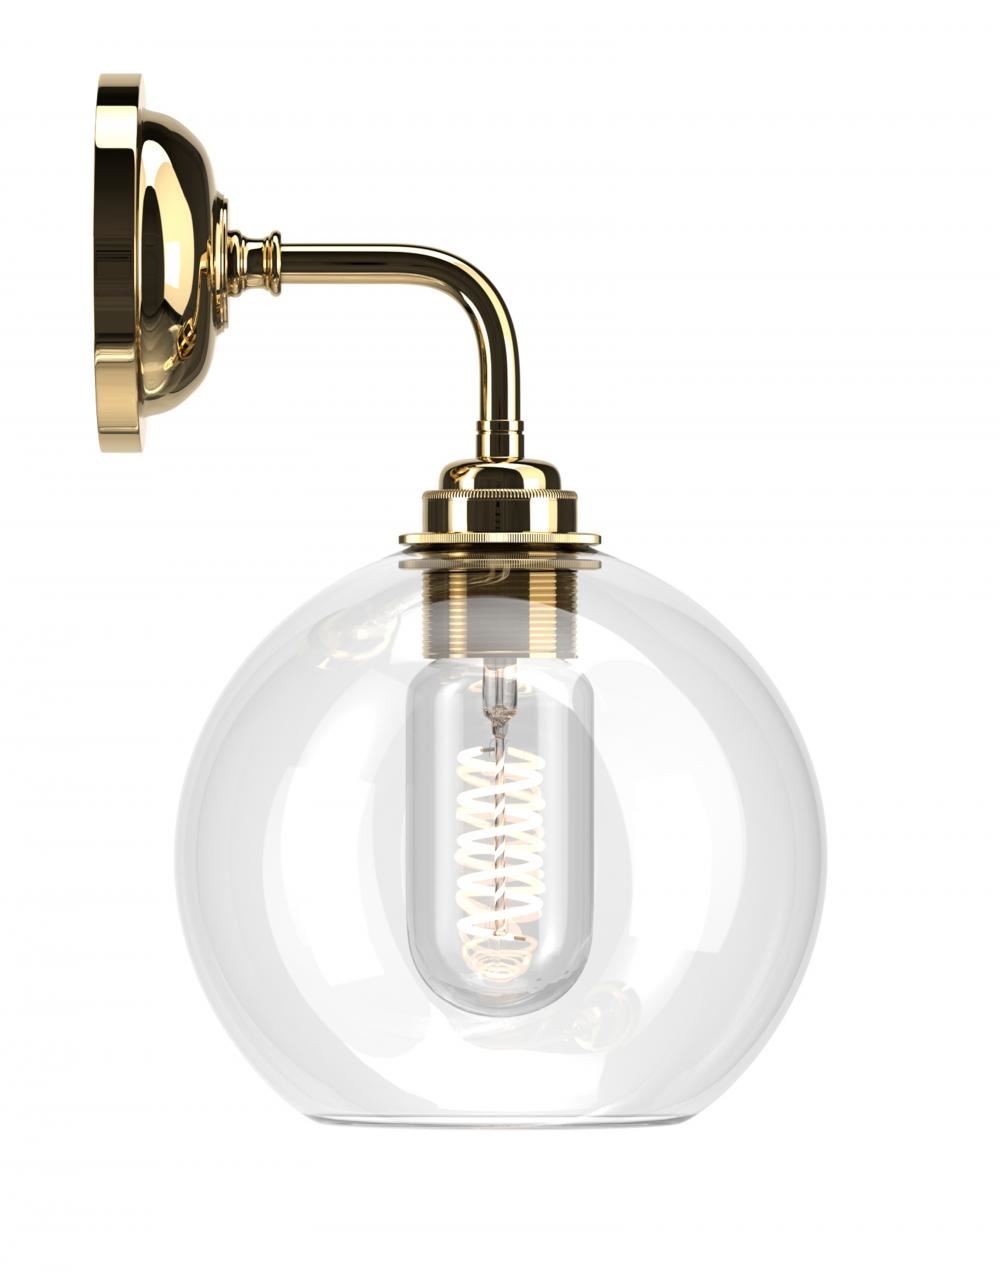 Hereford Bathroom Wall Light Clear Polished Brass